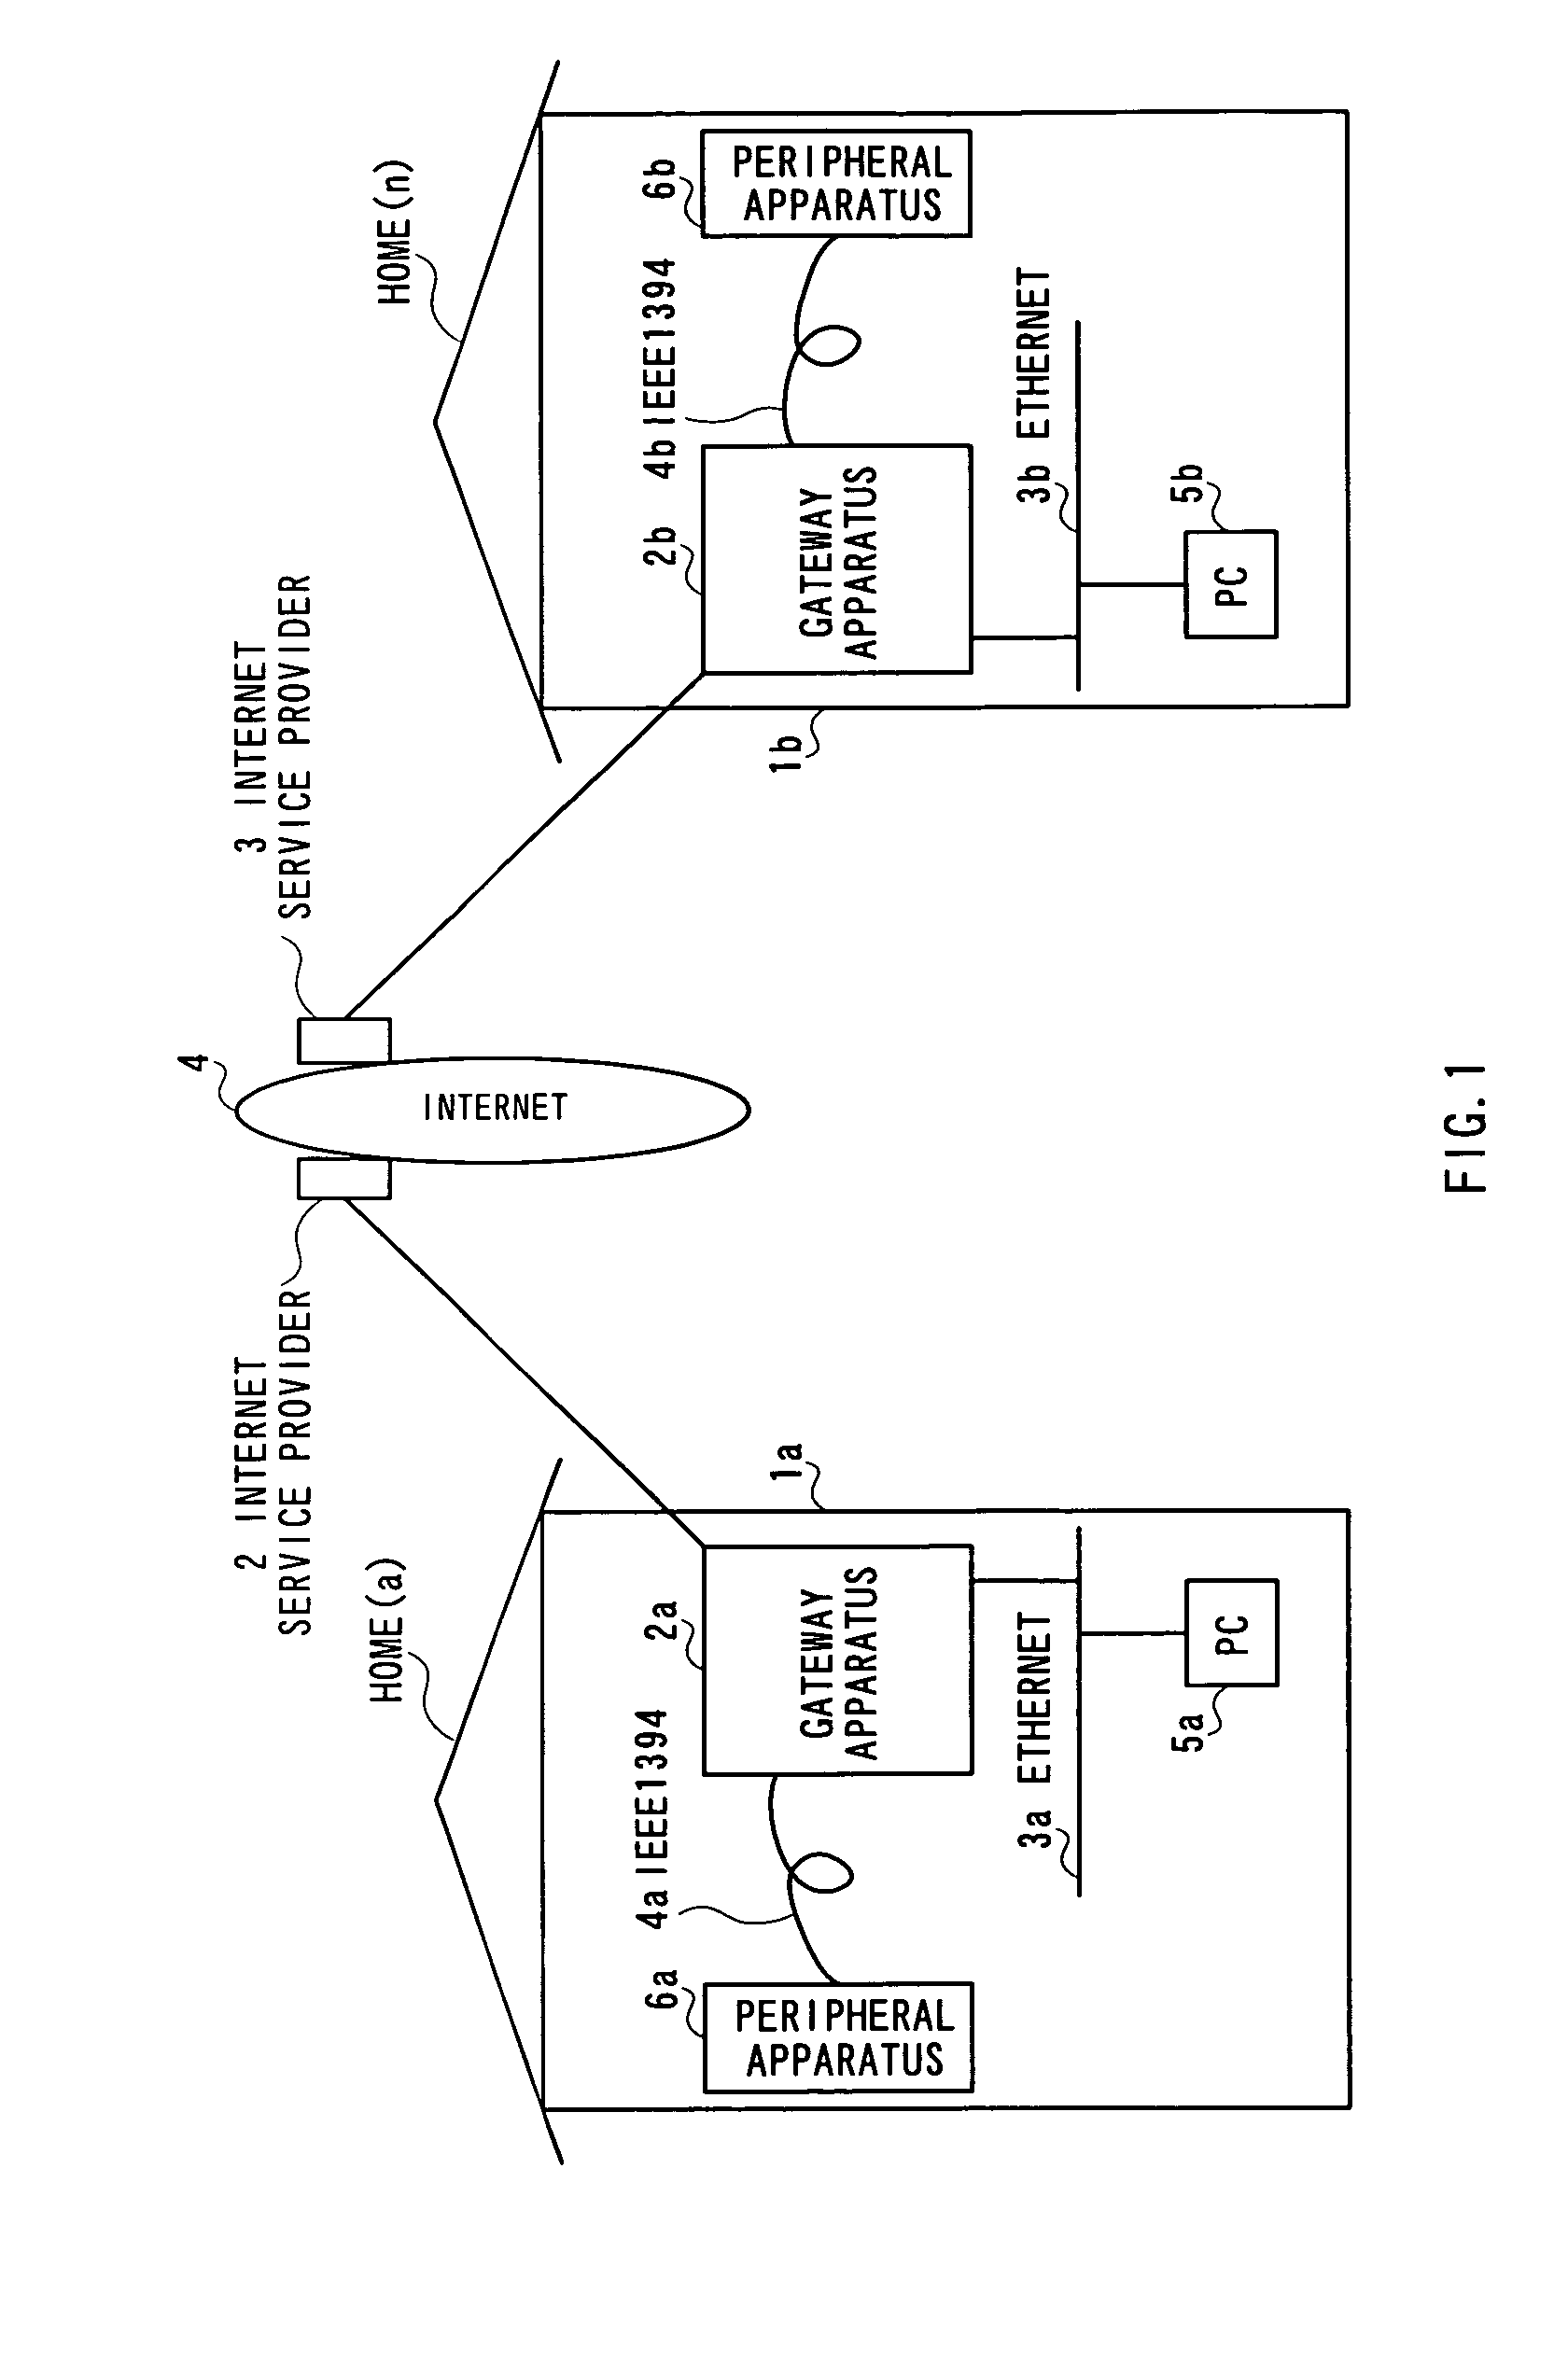 Gateway apparatus for controlling apparatuses on home network